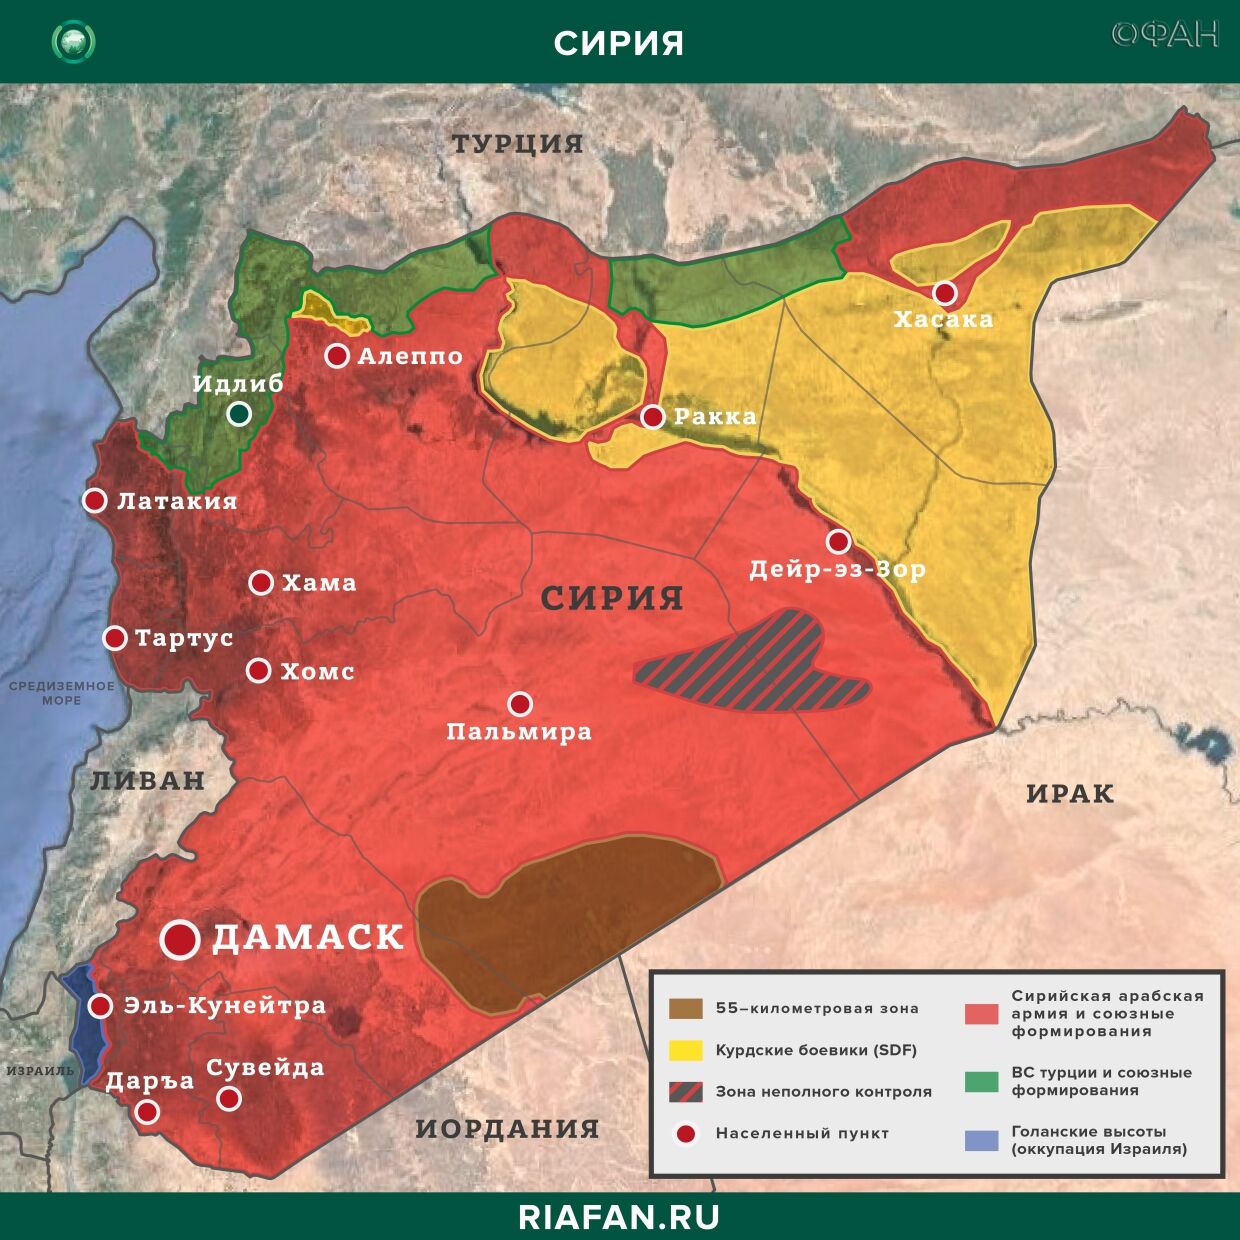 Syria the results of the day on 26 April 06.00: US creates group to maintain control over oil, attack on the headquarters of ITS in Idlib